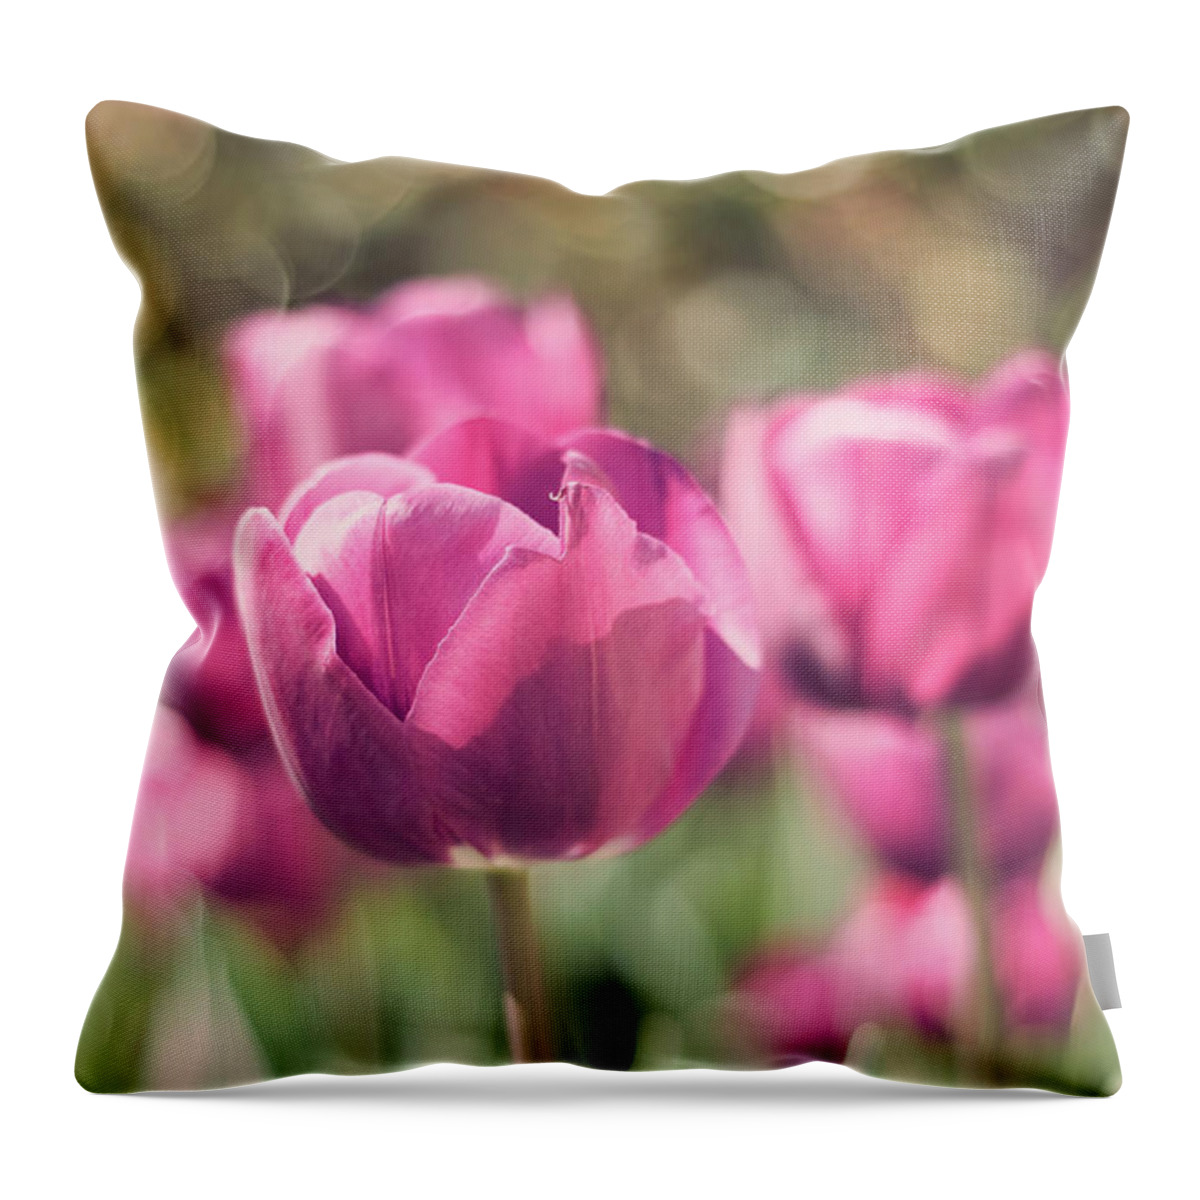 Petal Throw Pillow featuring the photograph Bokeh Of Pink Tulips In Botanic Garden by Miguel Sanz